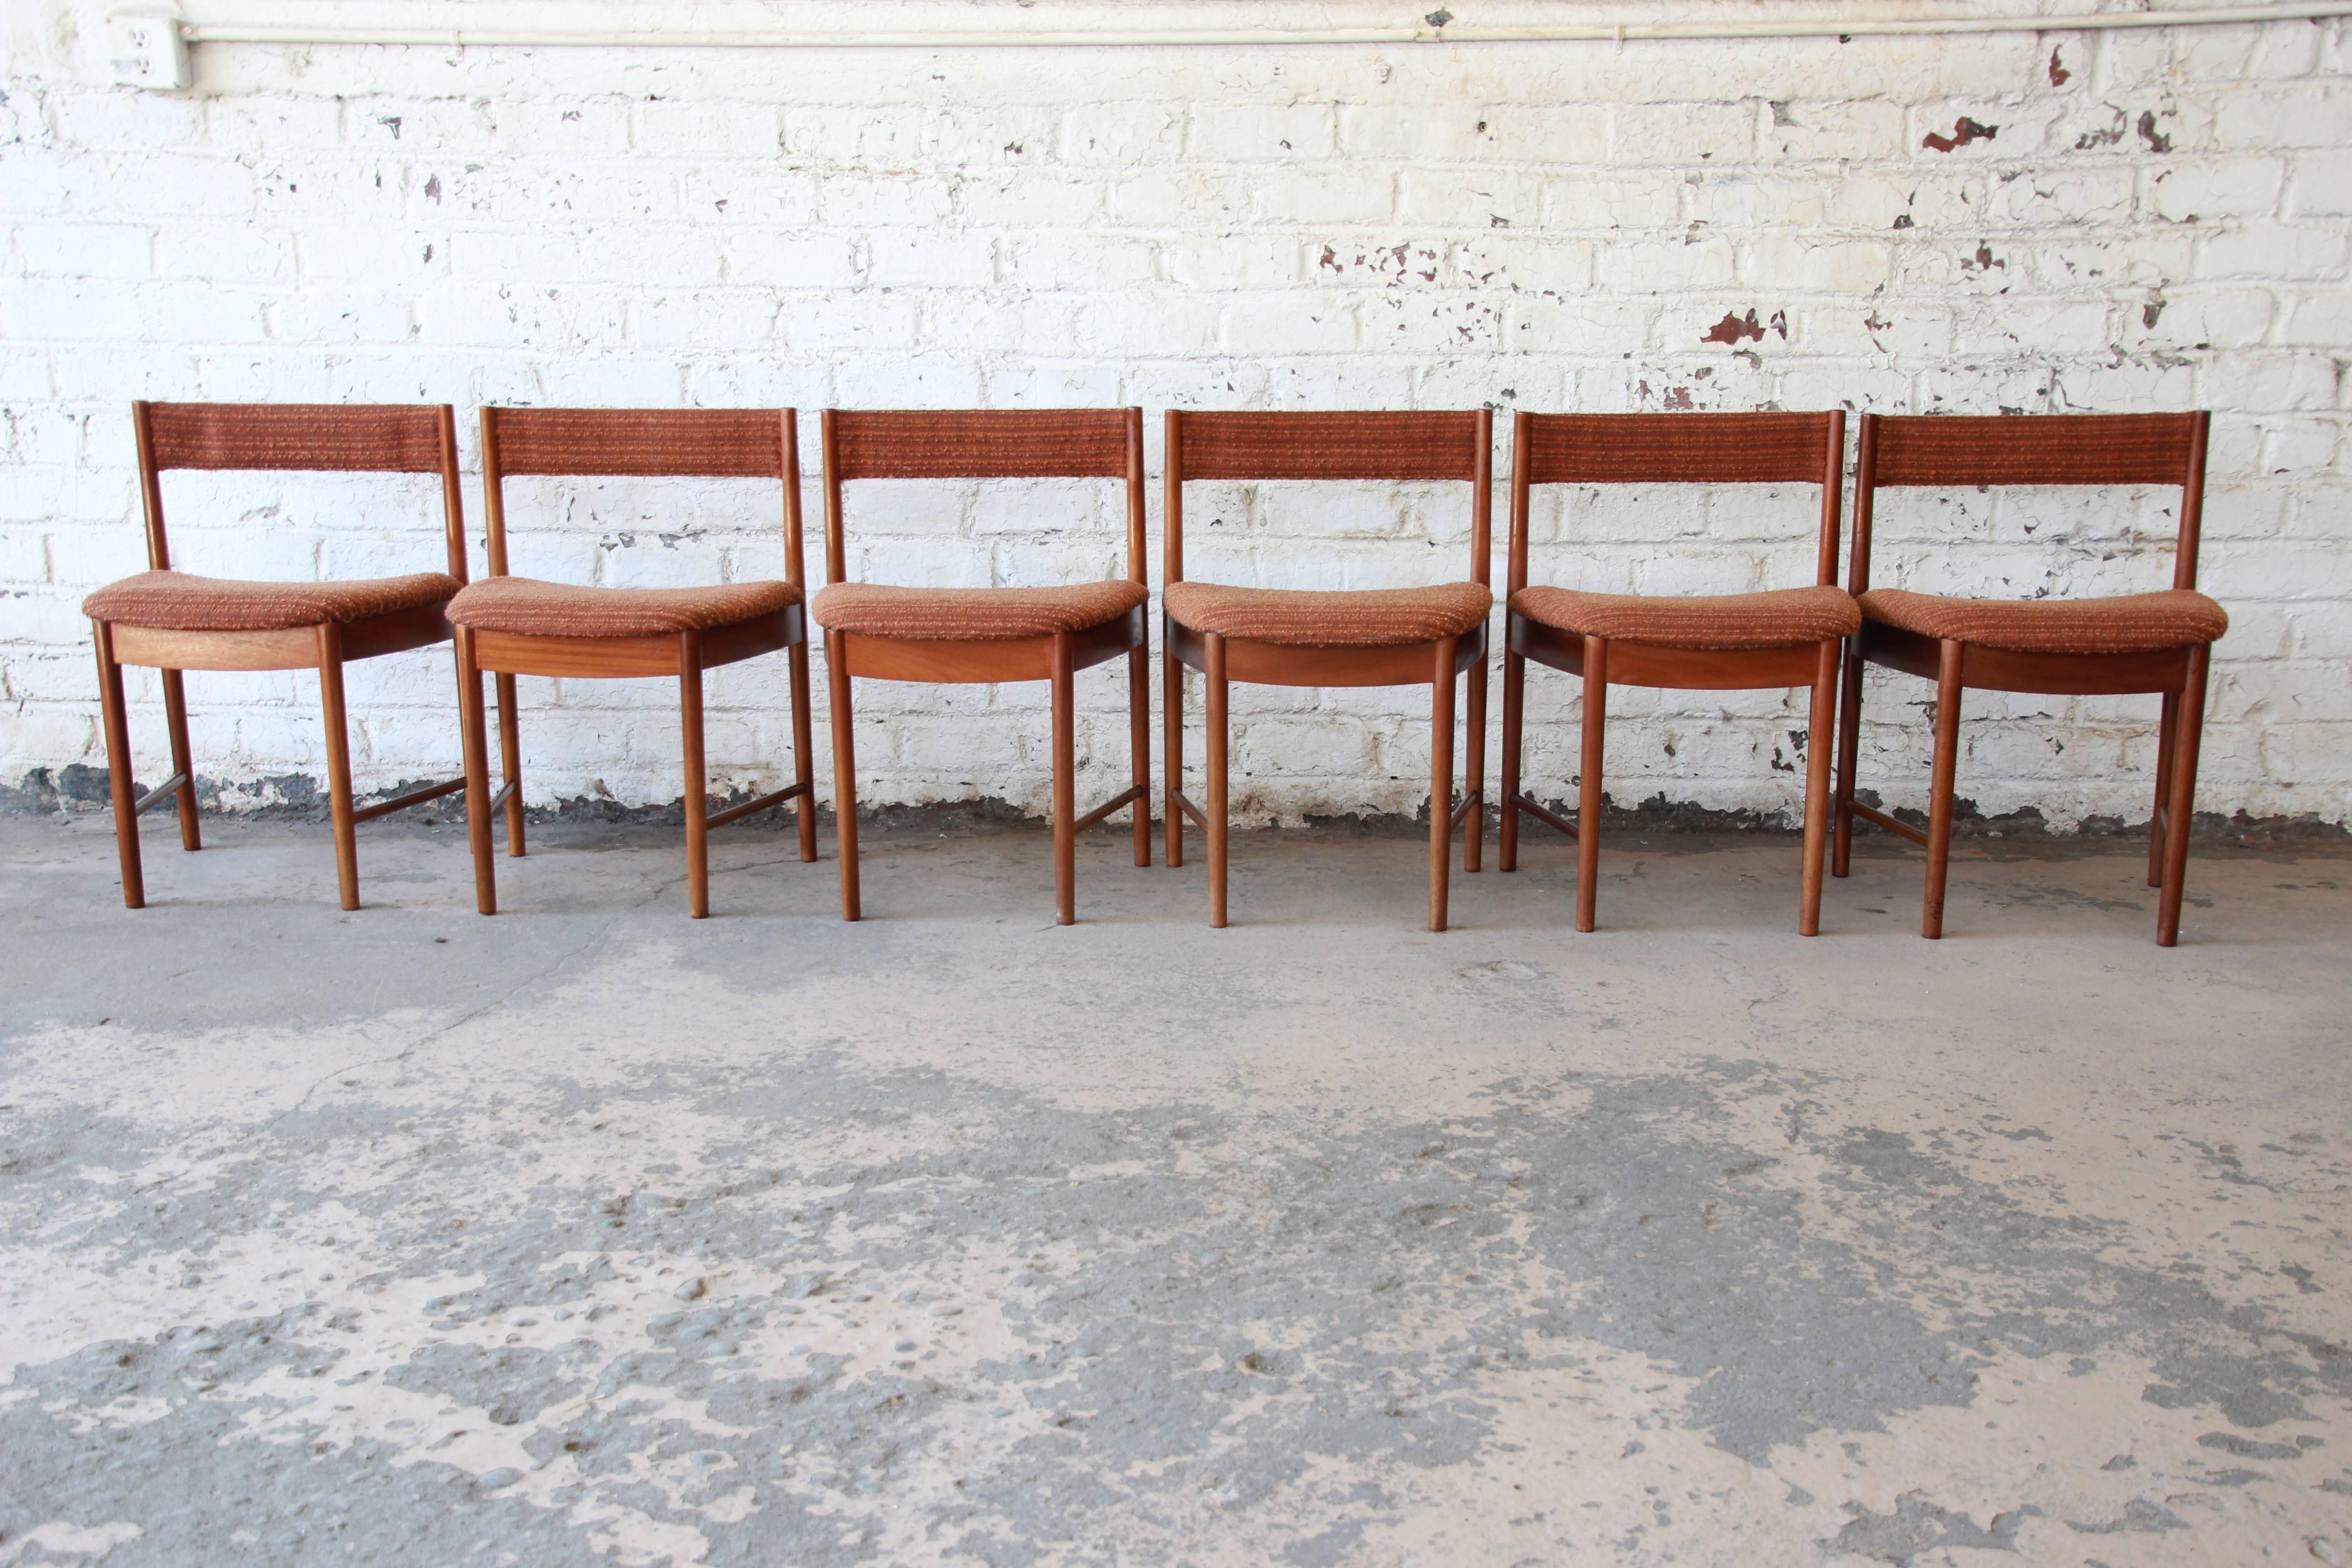 A beautiful set of six Mid-Century Modern teak dining chairs by G-Plan. The chairs feature solid teak wood construction and a unique wedge-shaped design. The burnt orange tweed upholstery is original and in very good condition. The chairs are sturdy